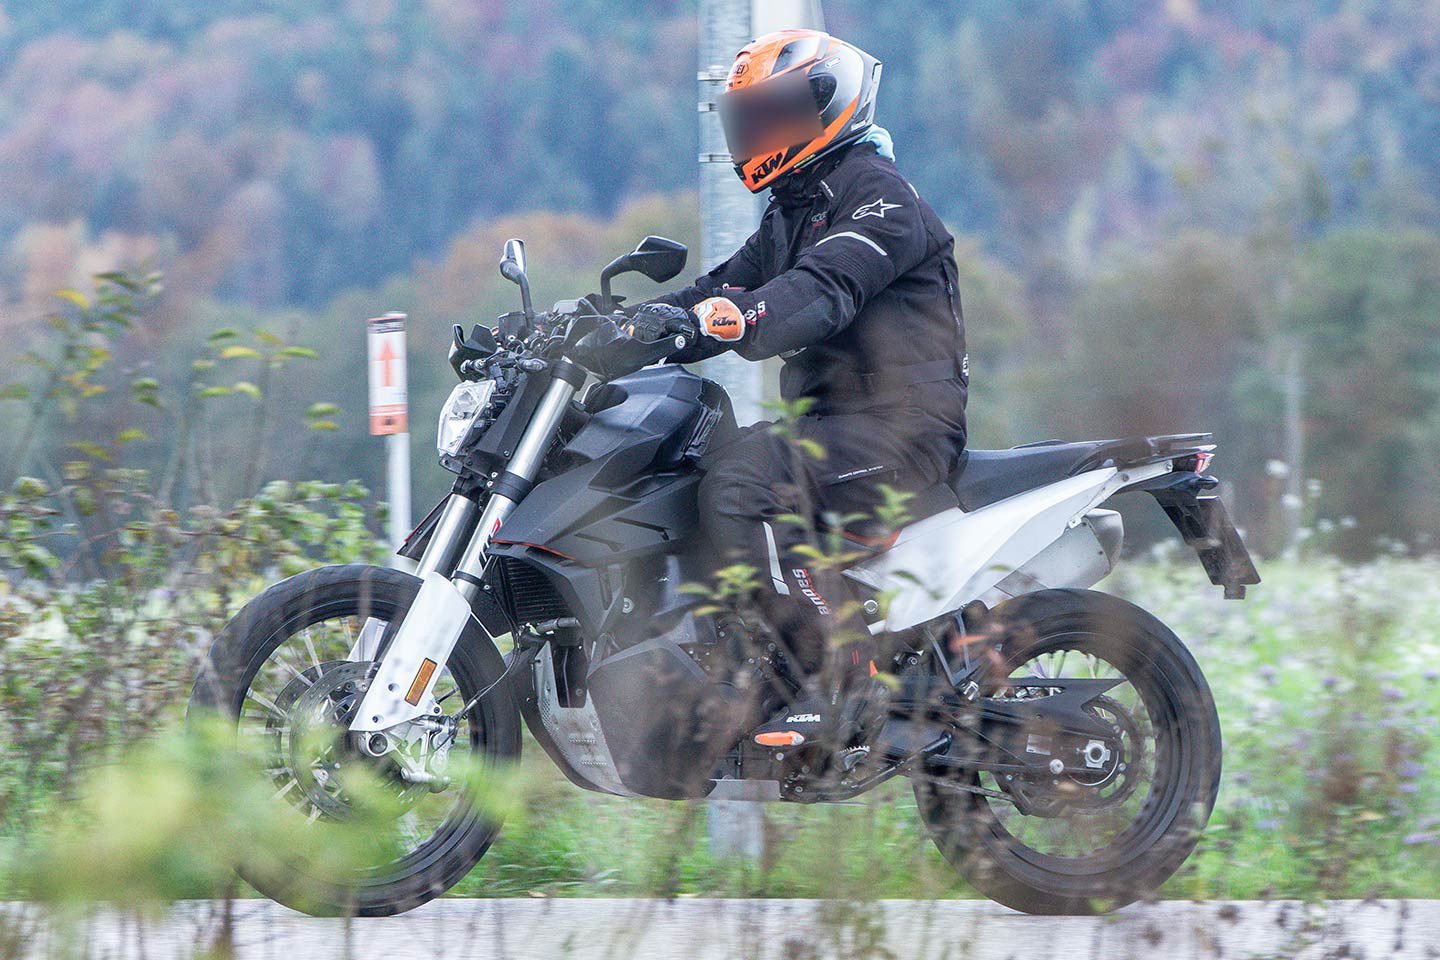 GasGas’ ES 900 enduro-style parallel twin would use most of the engine and chassis that is found on the KTM 890 Adventure and Husqvarna Norden 901.